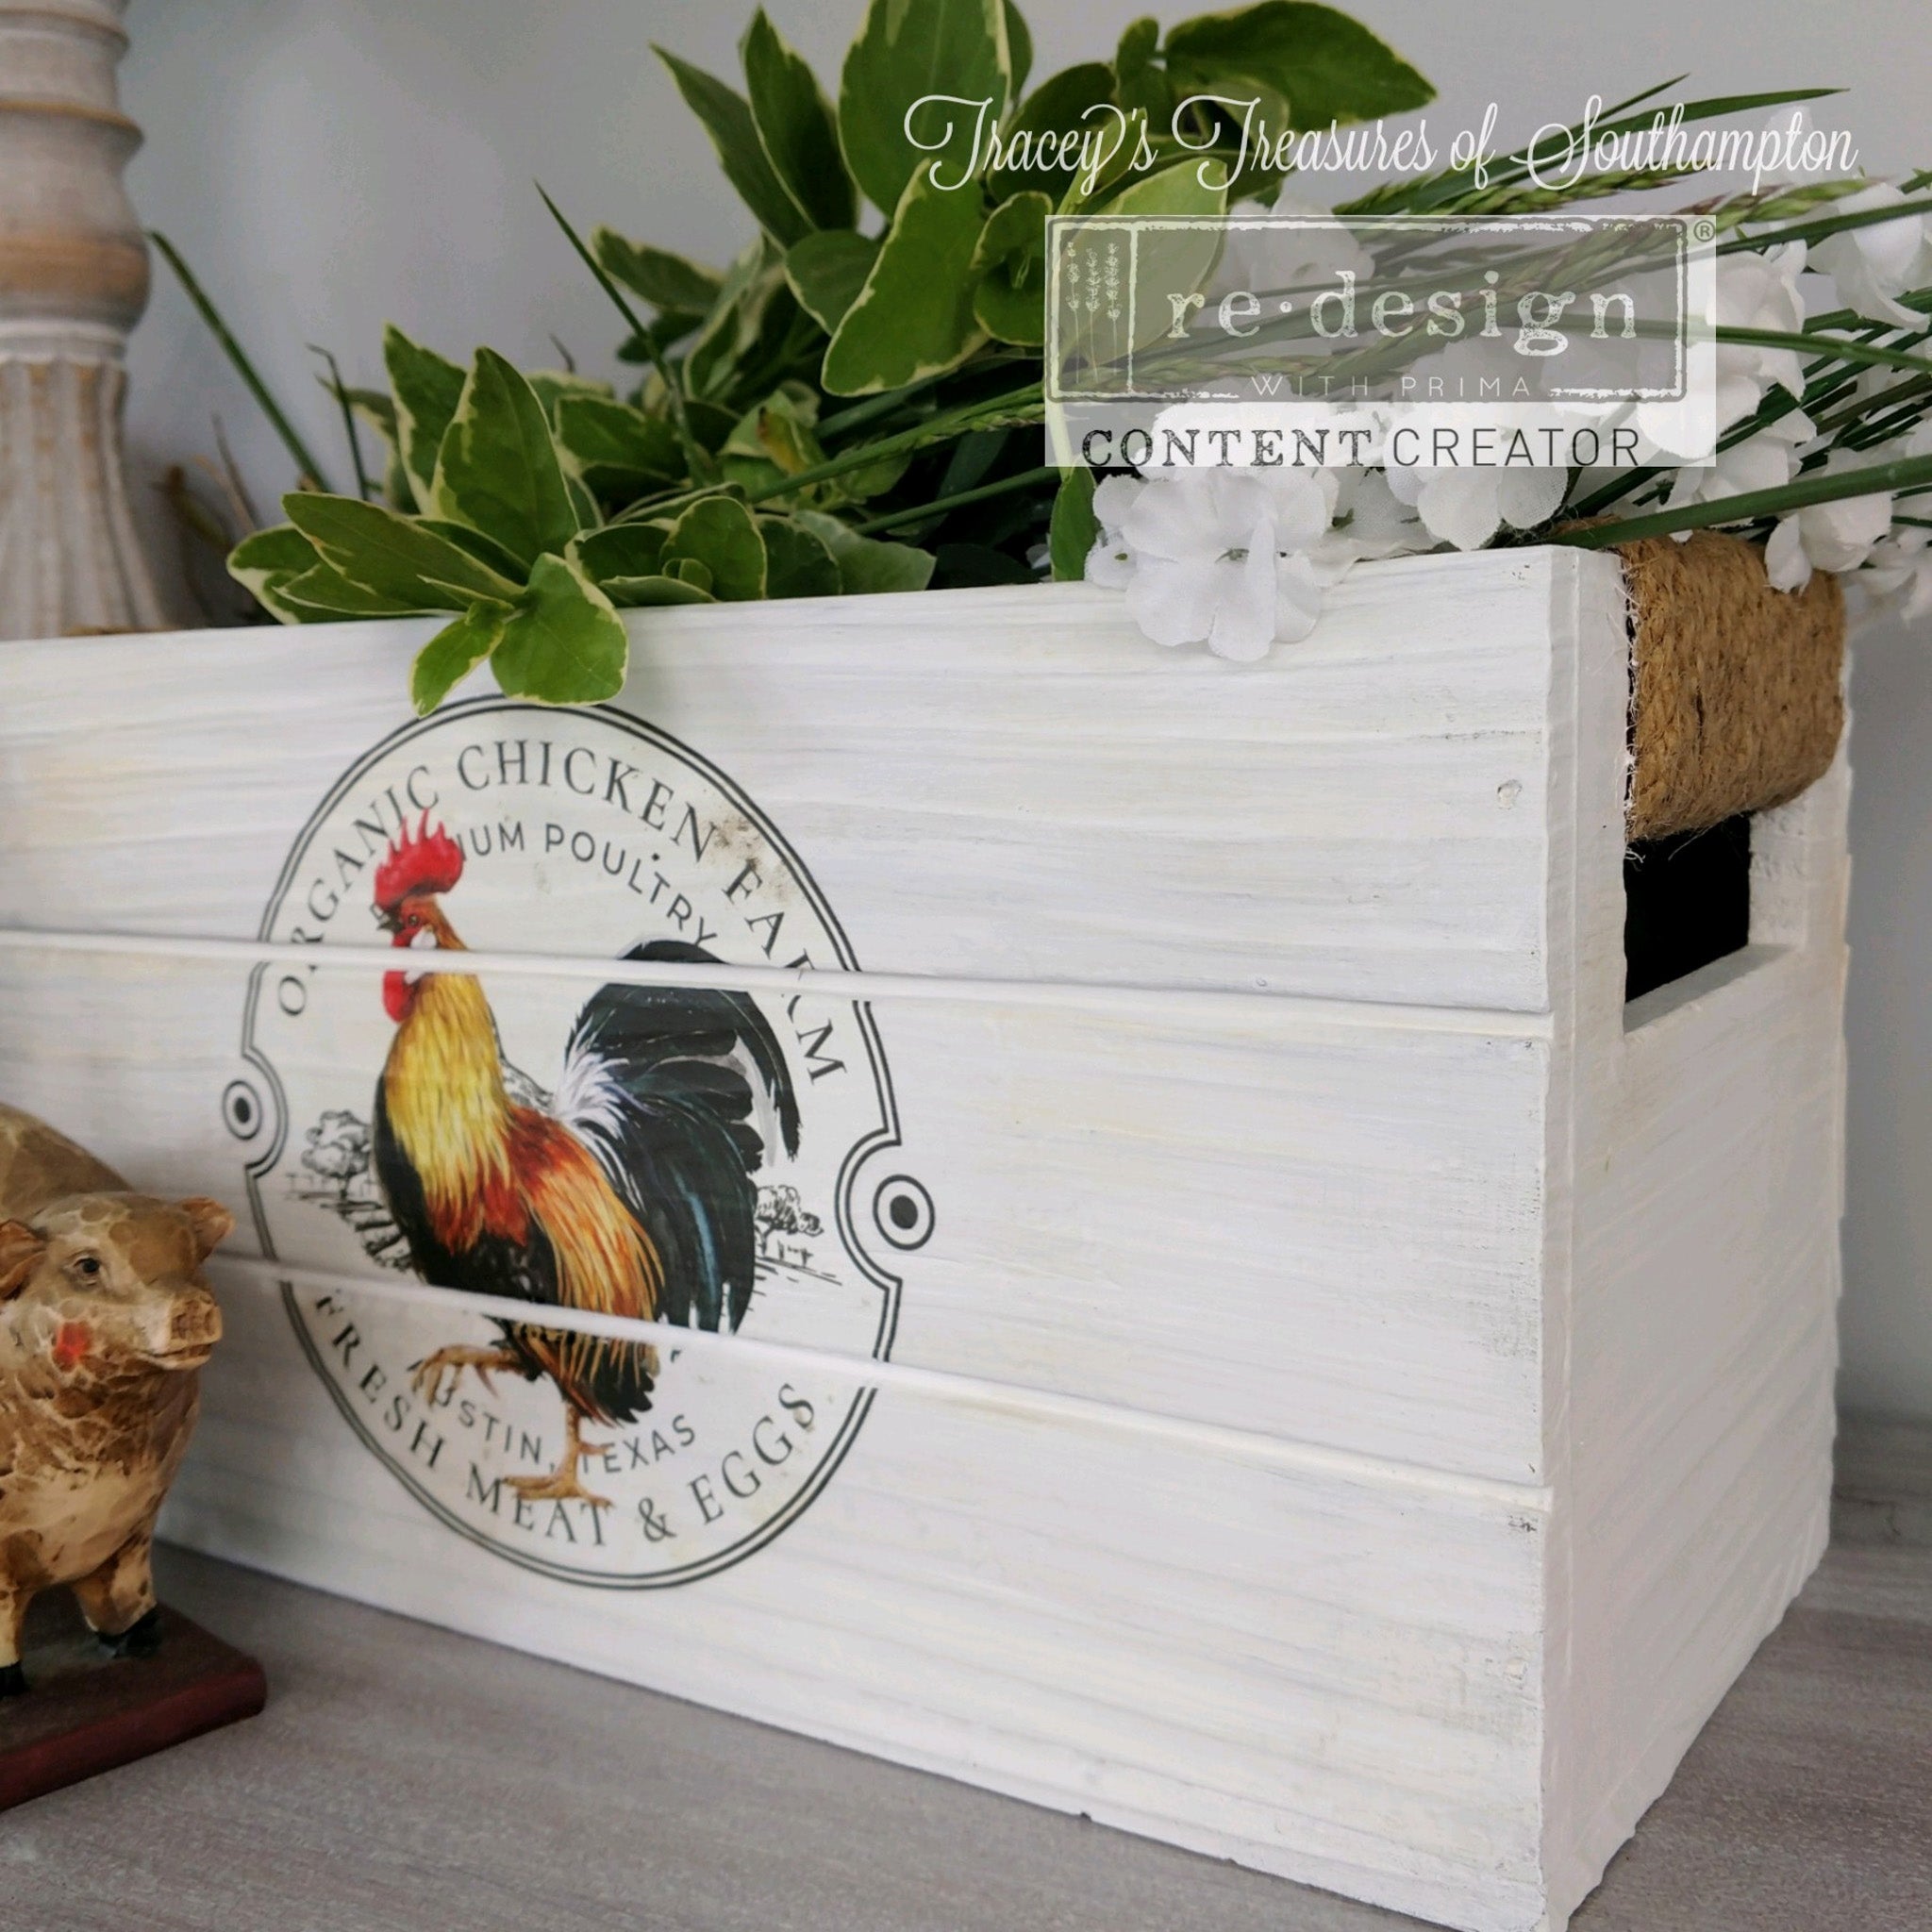 A wood box turned into a plant holder refurbished by Tracey's Treasures of Southampton is painted white and features ReDesign with Prima's Morning Farmhouse small transfer on it.